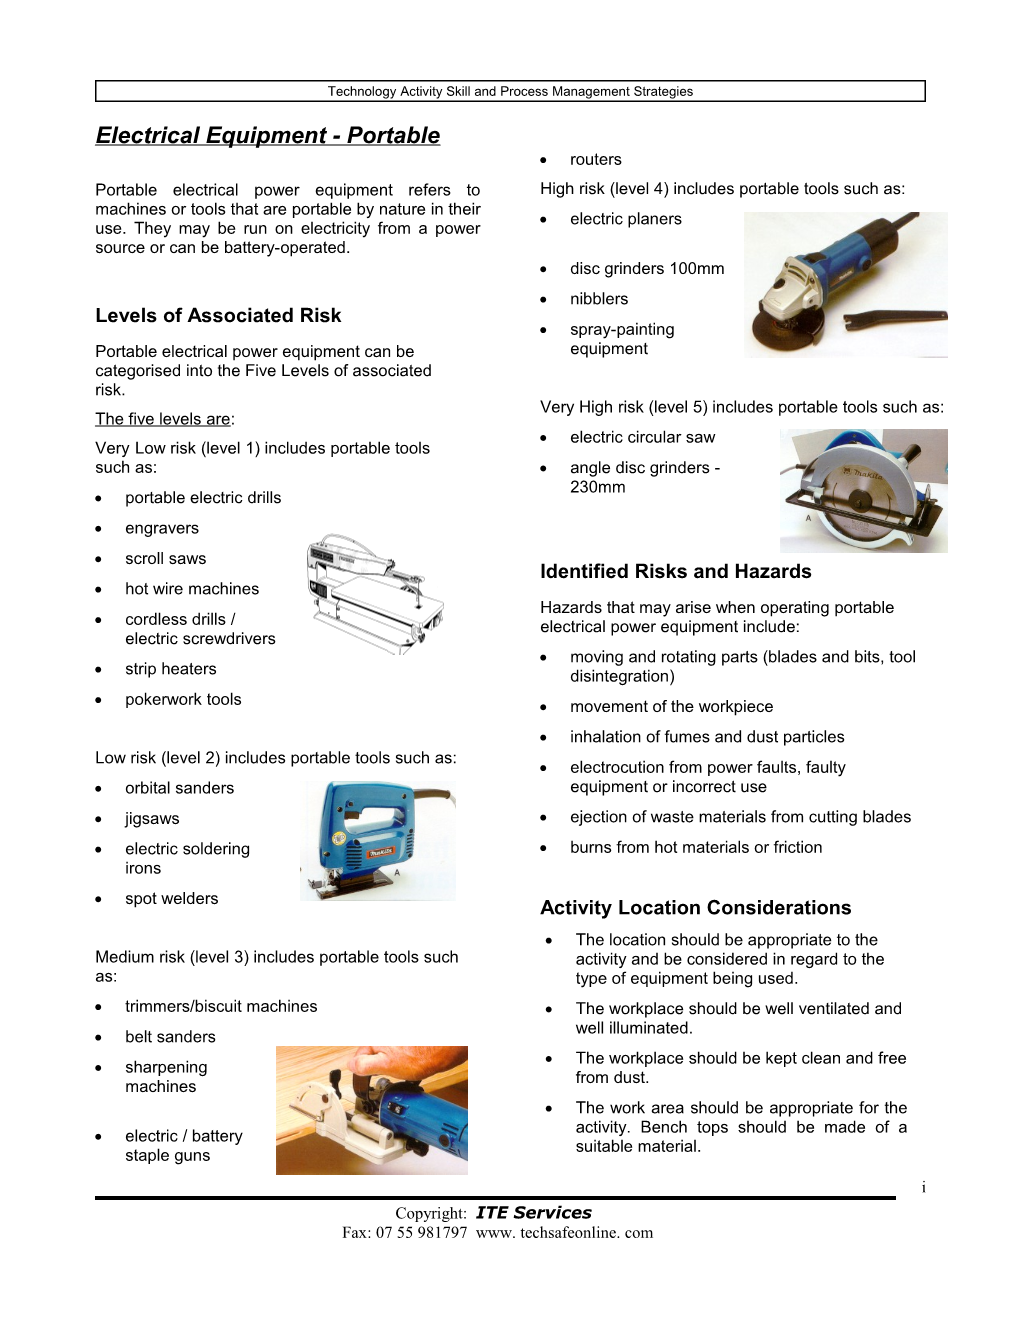 Electrical Equipment - Portable